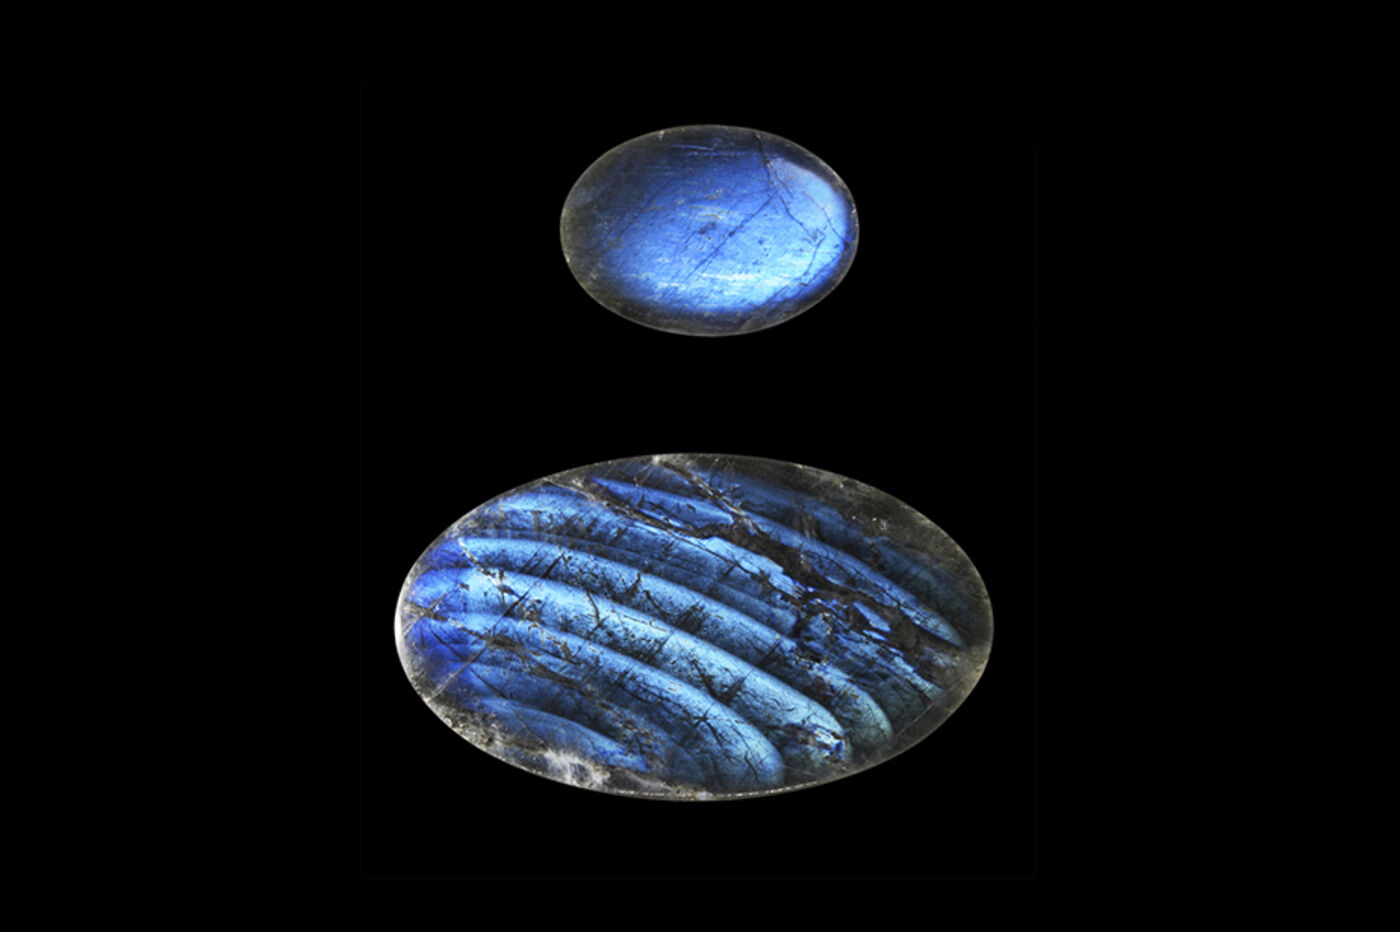 Two examples of rainbow moonstone, a small blue oval disc-shaped stone above a larger oval stone with what appear to be striped markings.